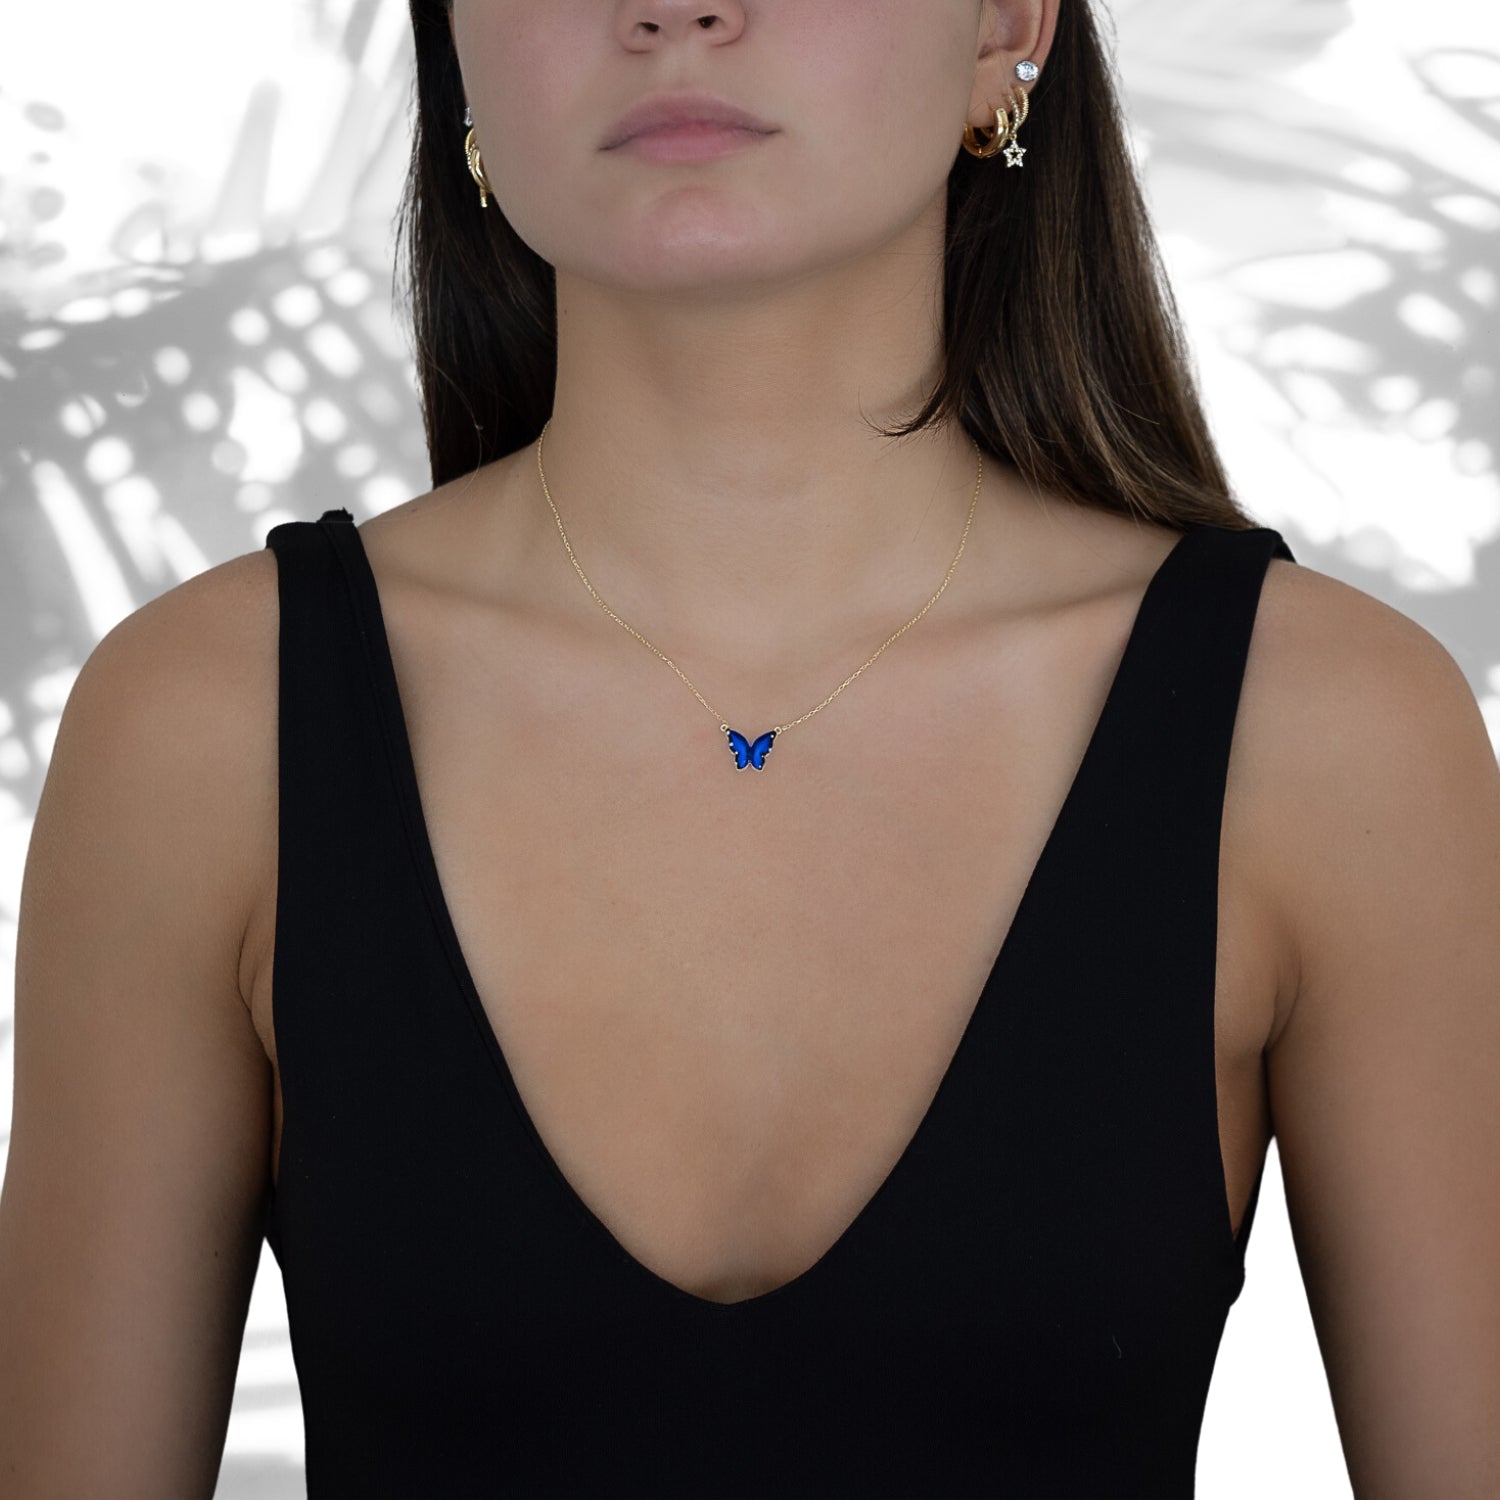 Model wearing the Gold Spiritual Blue Enamel Butterfly Necklace, showcasing its unique design and the transformative energy it symbolizes.